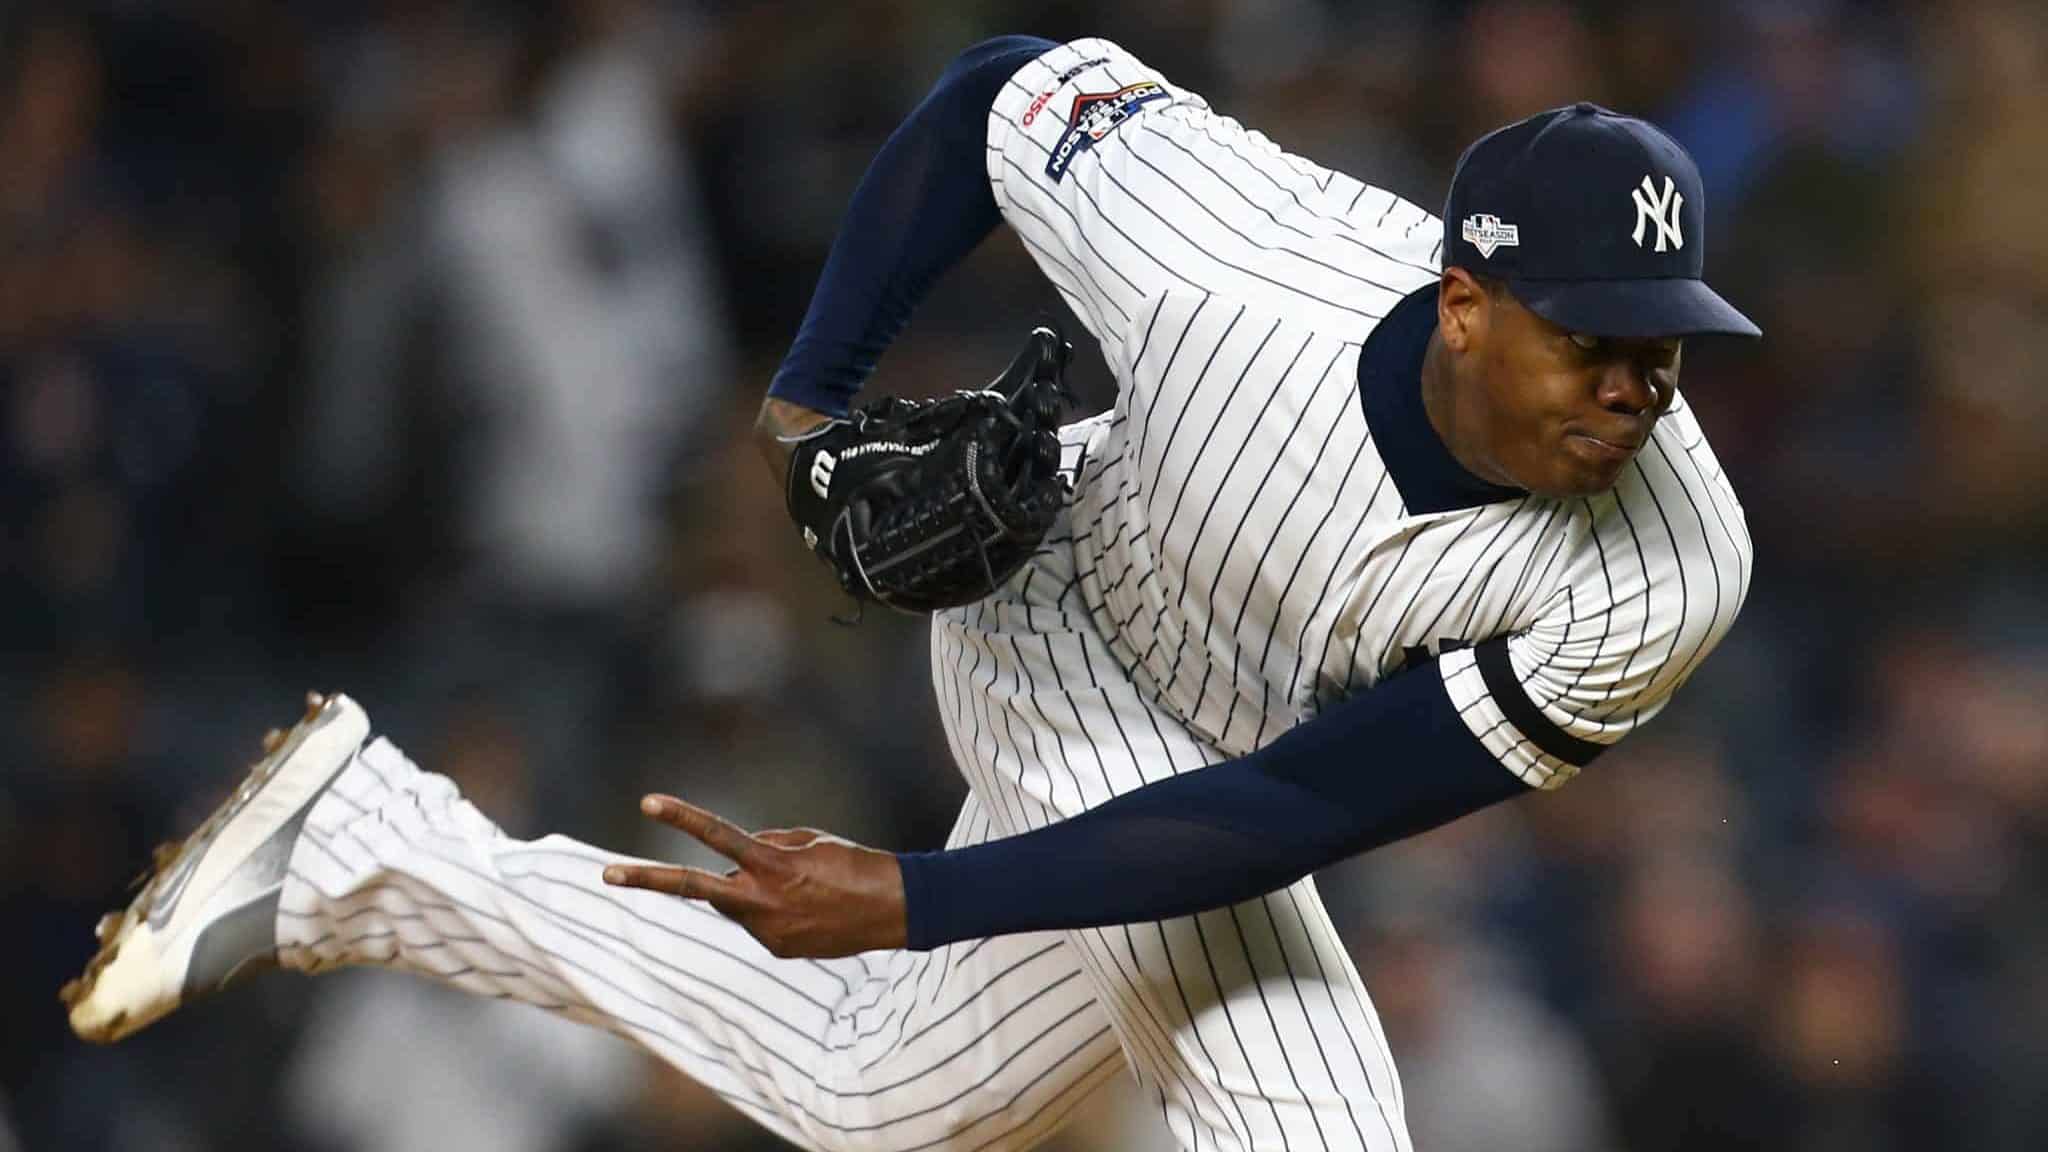 NEW YORK, NEW YORK - OCTOBER 18: Aroldis Chapman #54 of the New York Yankees throws a pitch against the Houston Astros during the ninth inning in game five of the American League Championship Series at Yankee Stadium on October 18, 2019 in New York City.